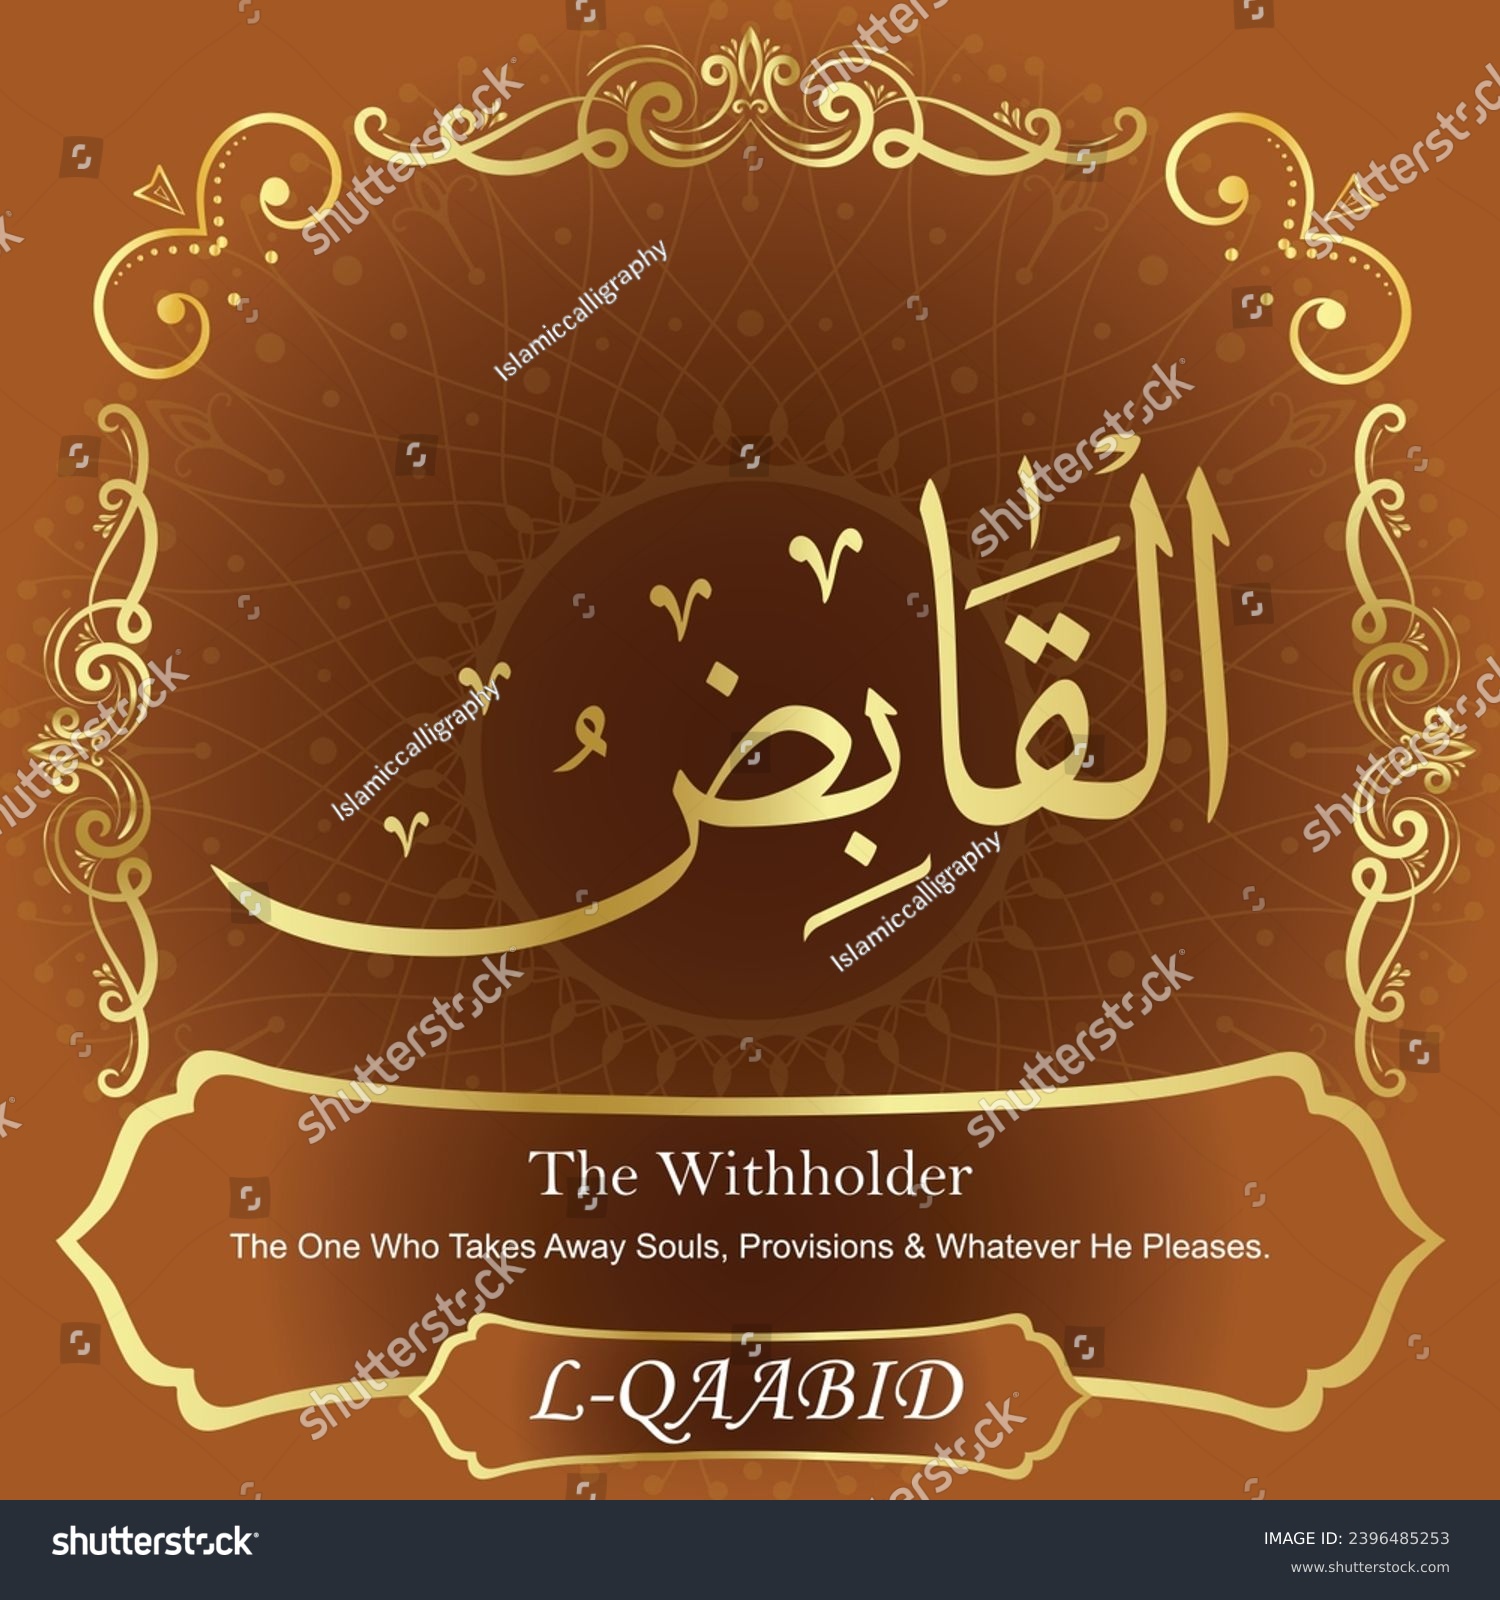 SVG of The Withholder. The One Who Takes Away Souls, Provisions and Whatever He
Pleases. svg